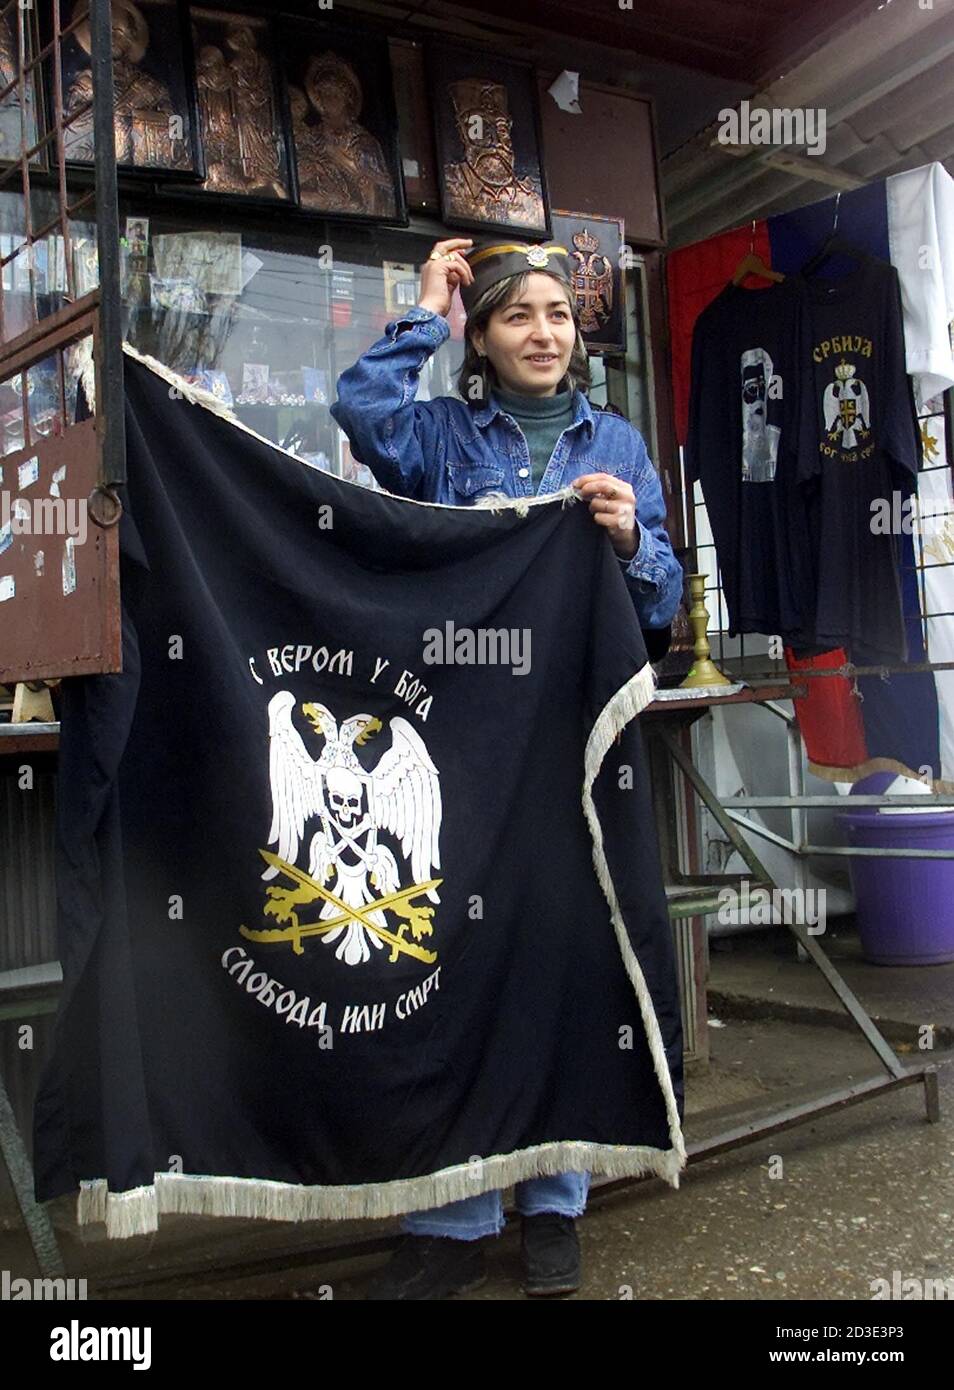 A Kosovo Serb girl tries on a traditional Cetnic hat holding a Serbian flag  November 14, 2001 in front of a memorabilia street shop in Gracanica, a  KFOR protected enclave near Pristina.